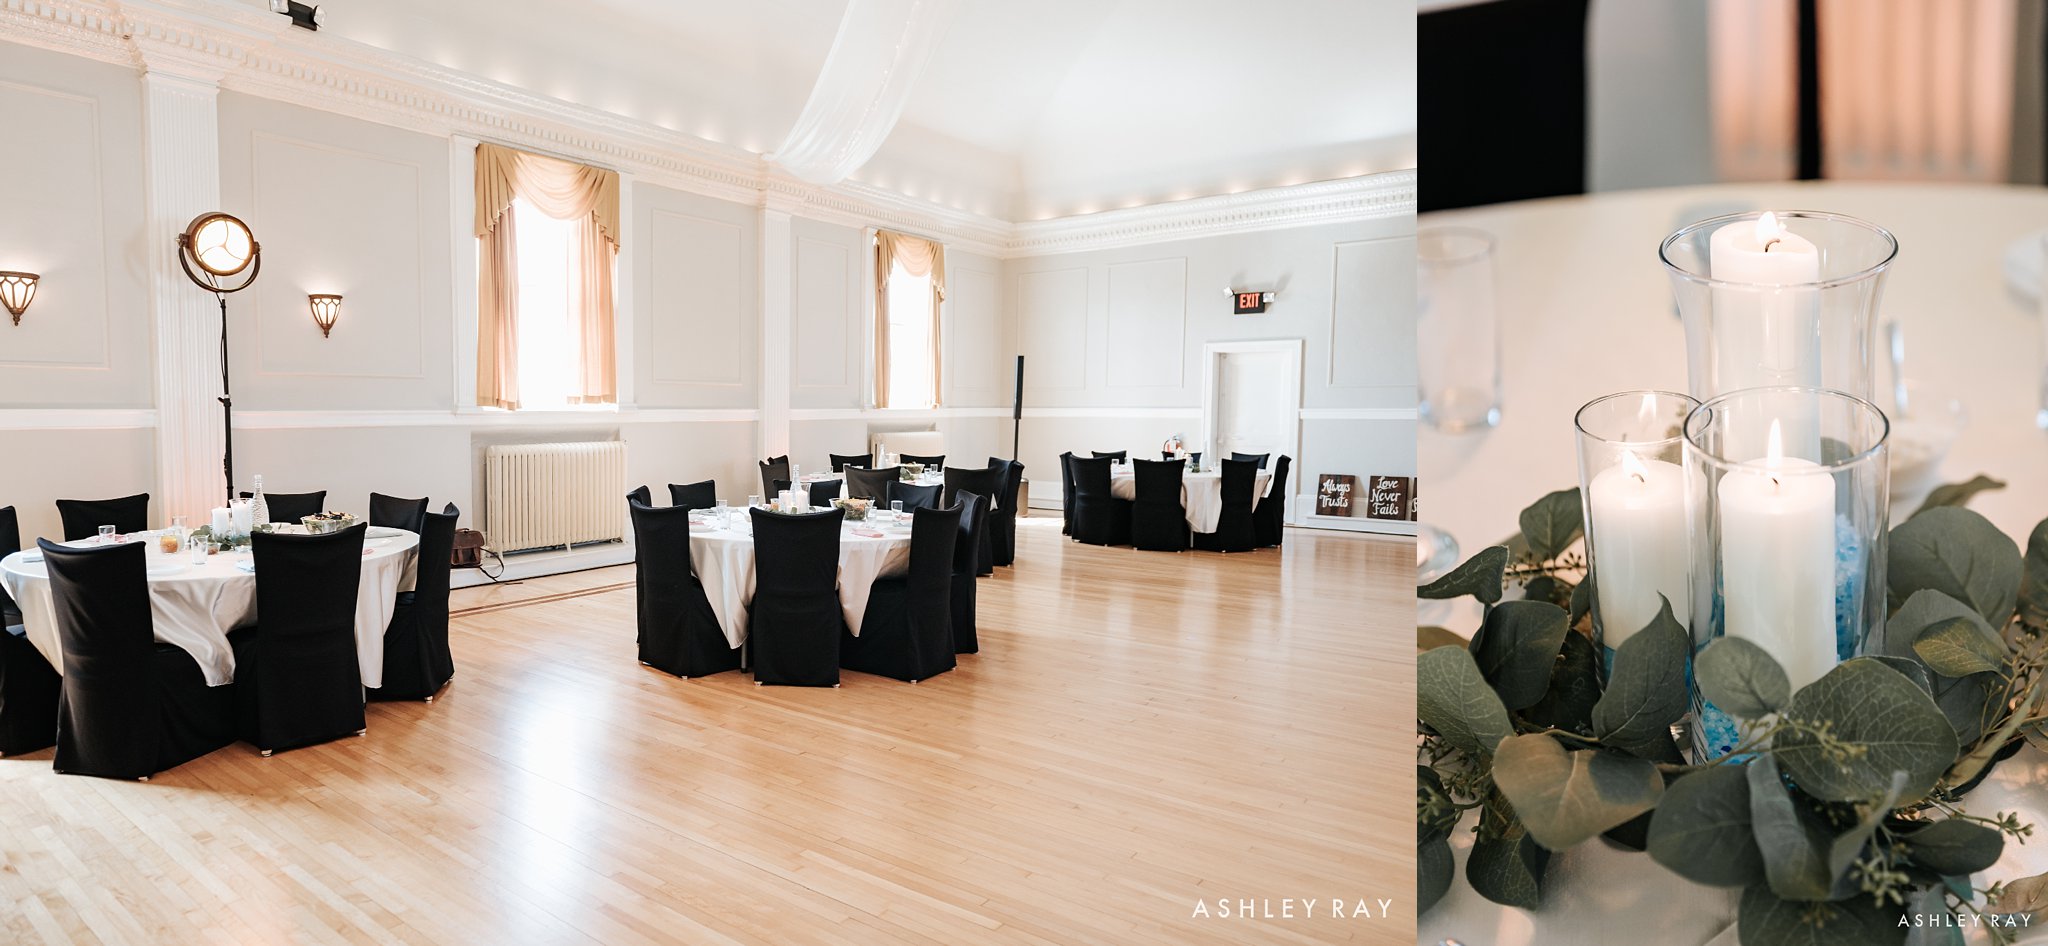 Sunny Spring Summer Wedding at The Venue at Anthony's in Downtown Wapakoneta, Ohio